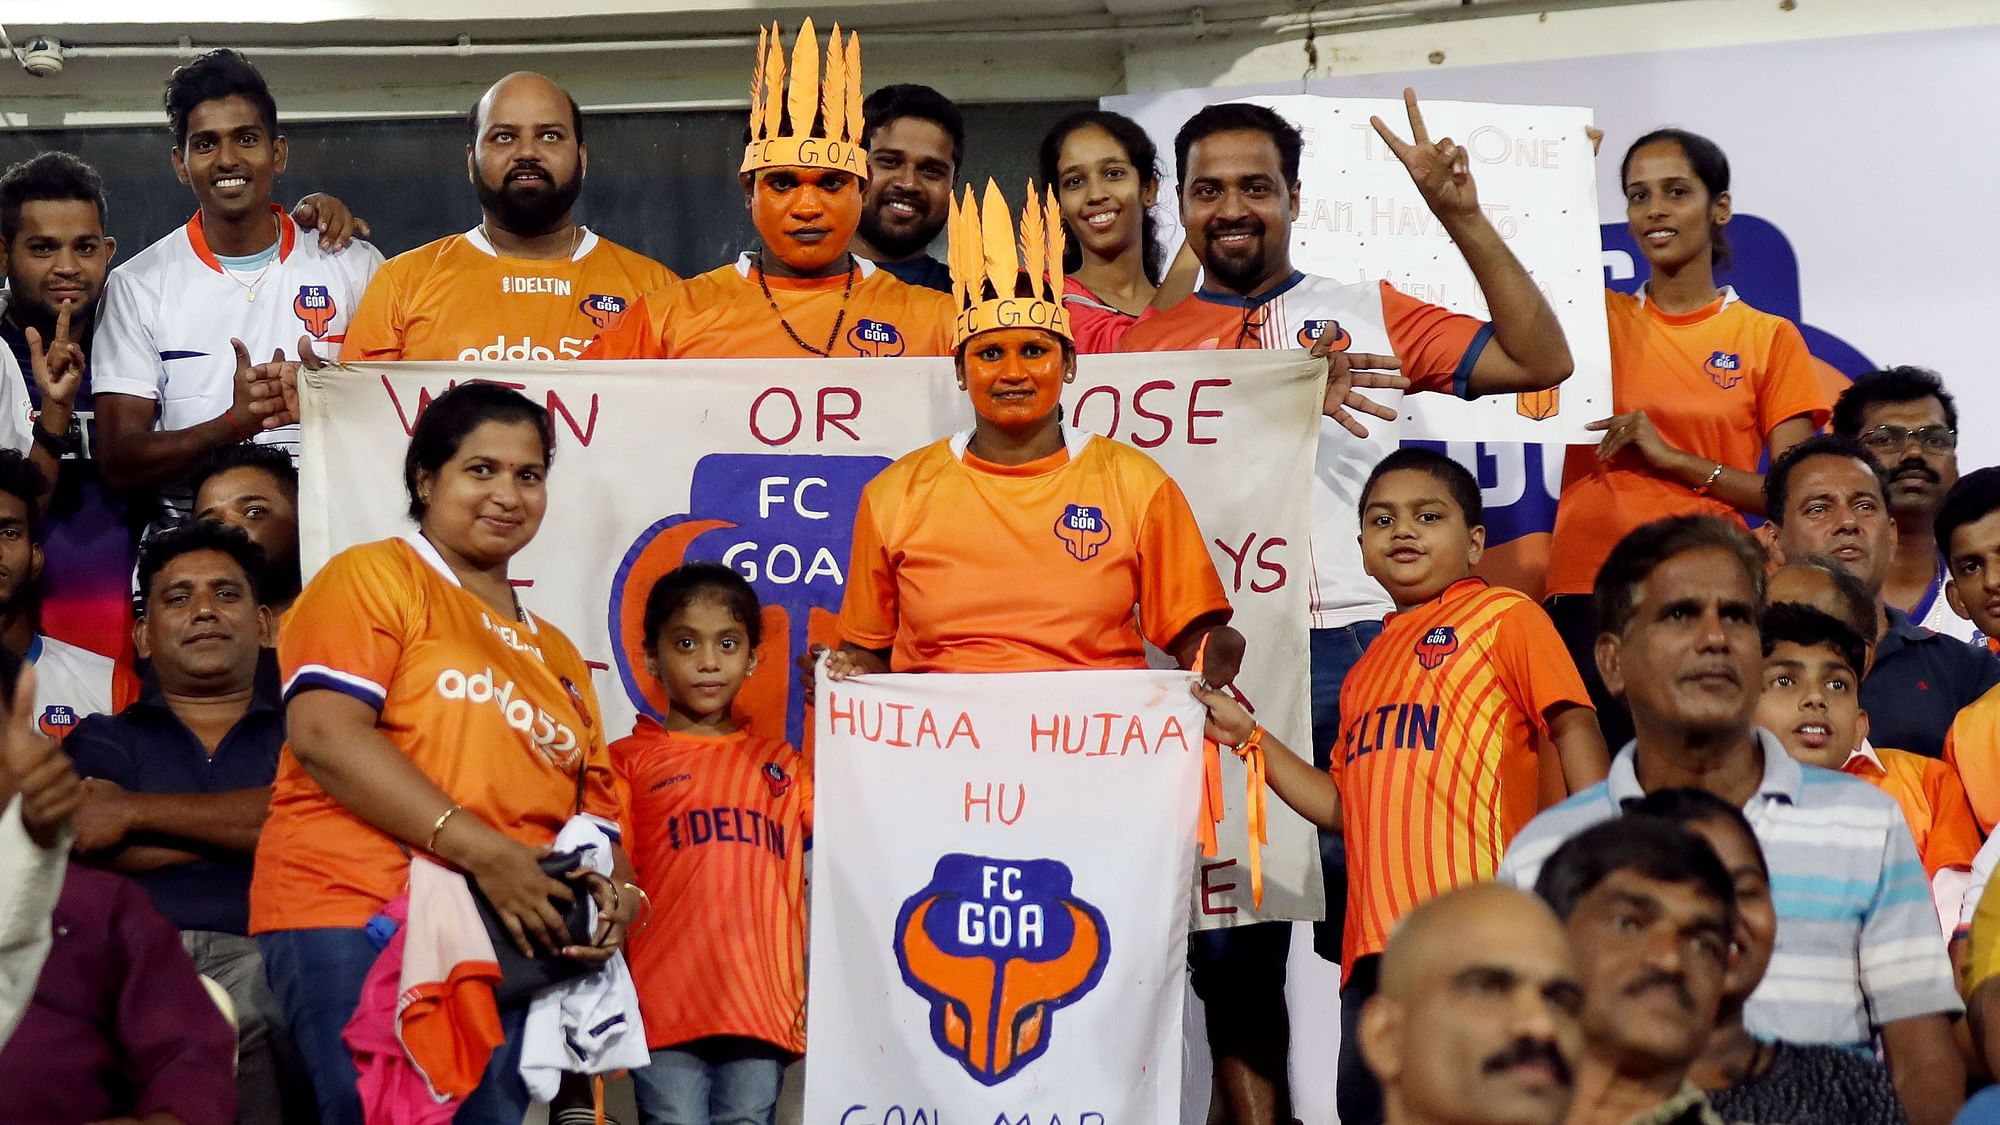 Fans have been left livid after Indian Super League franchise FC Goa banned posters and banners in the stadium.